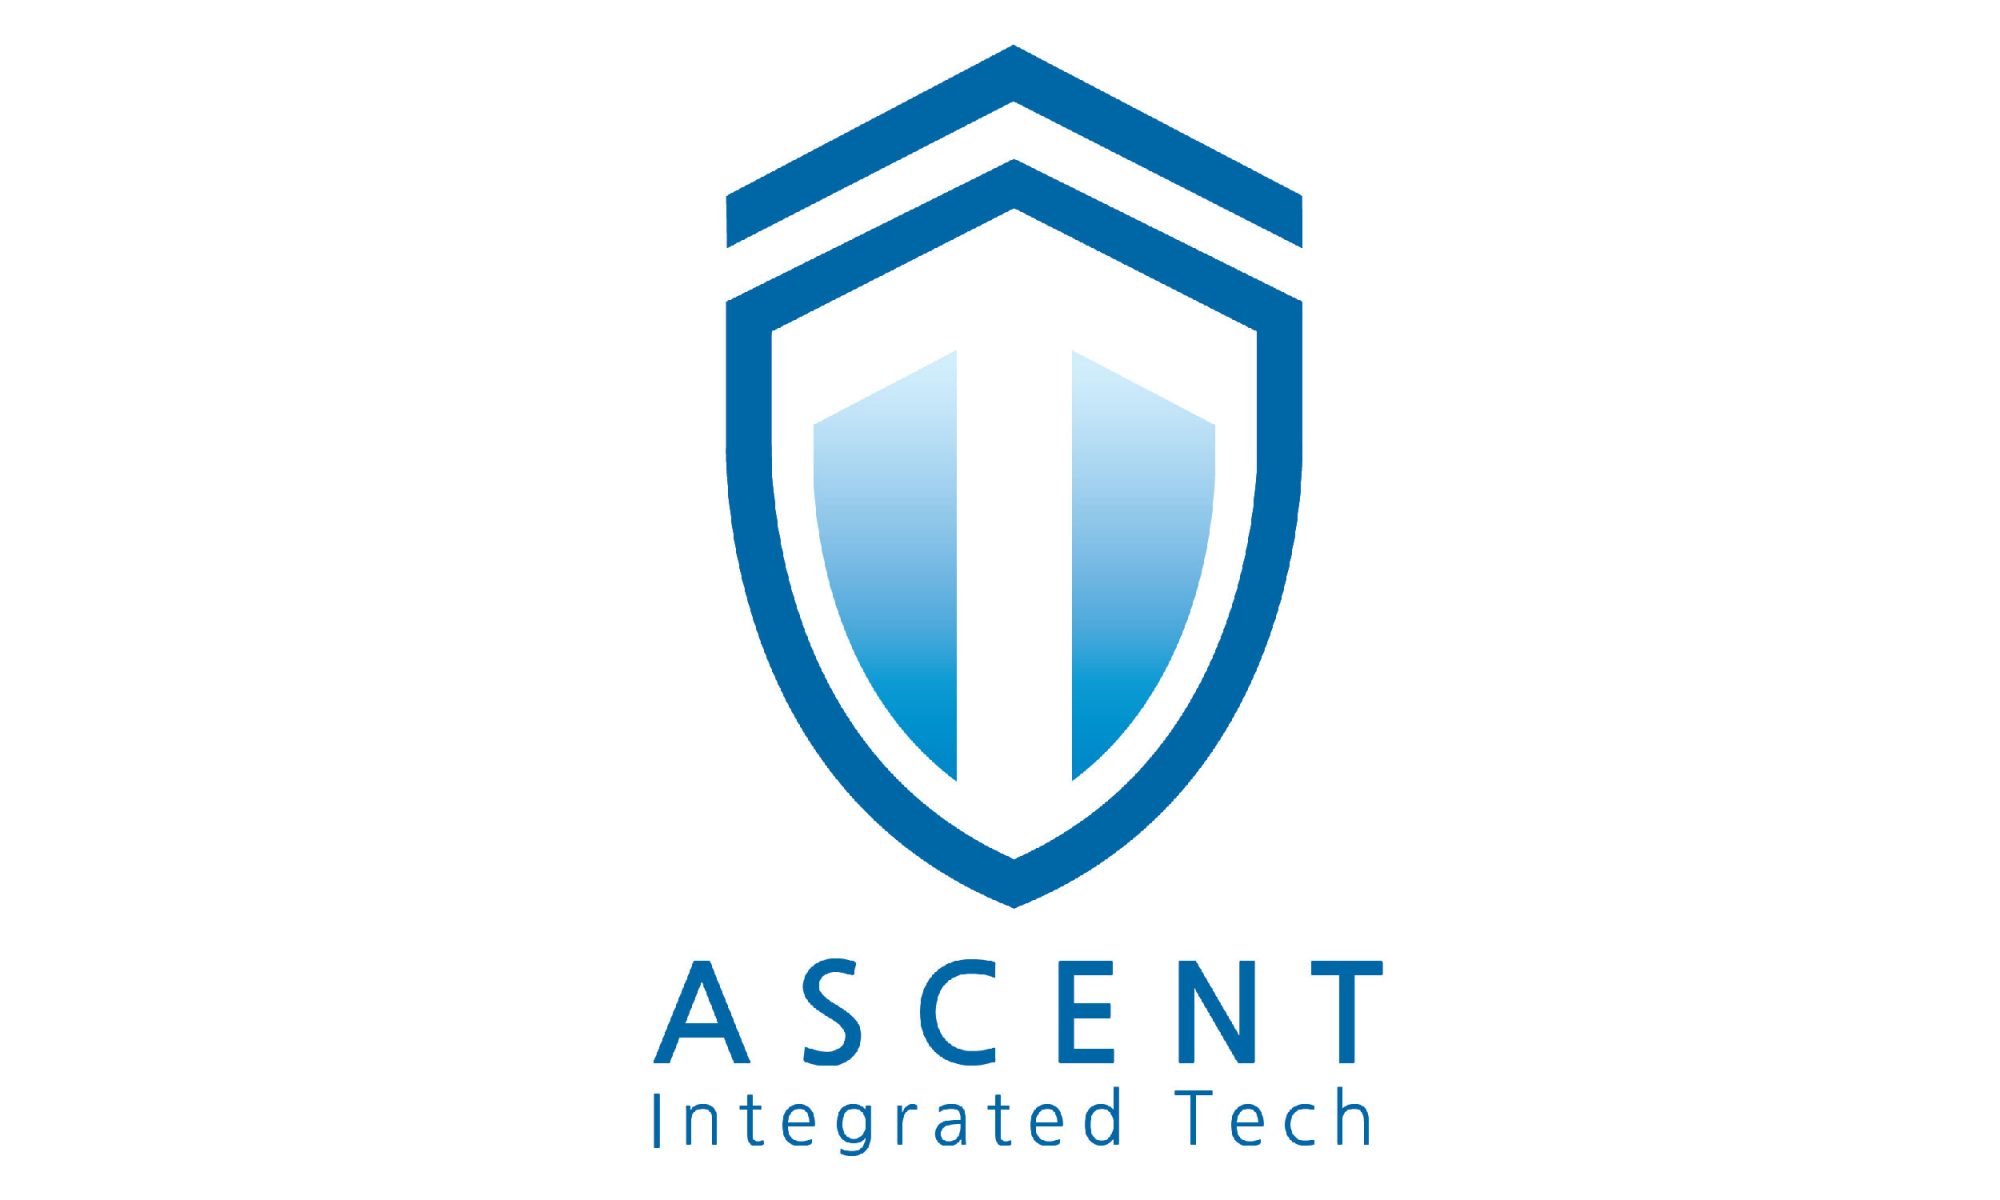 Ascent Integrated Tech